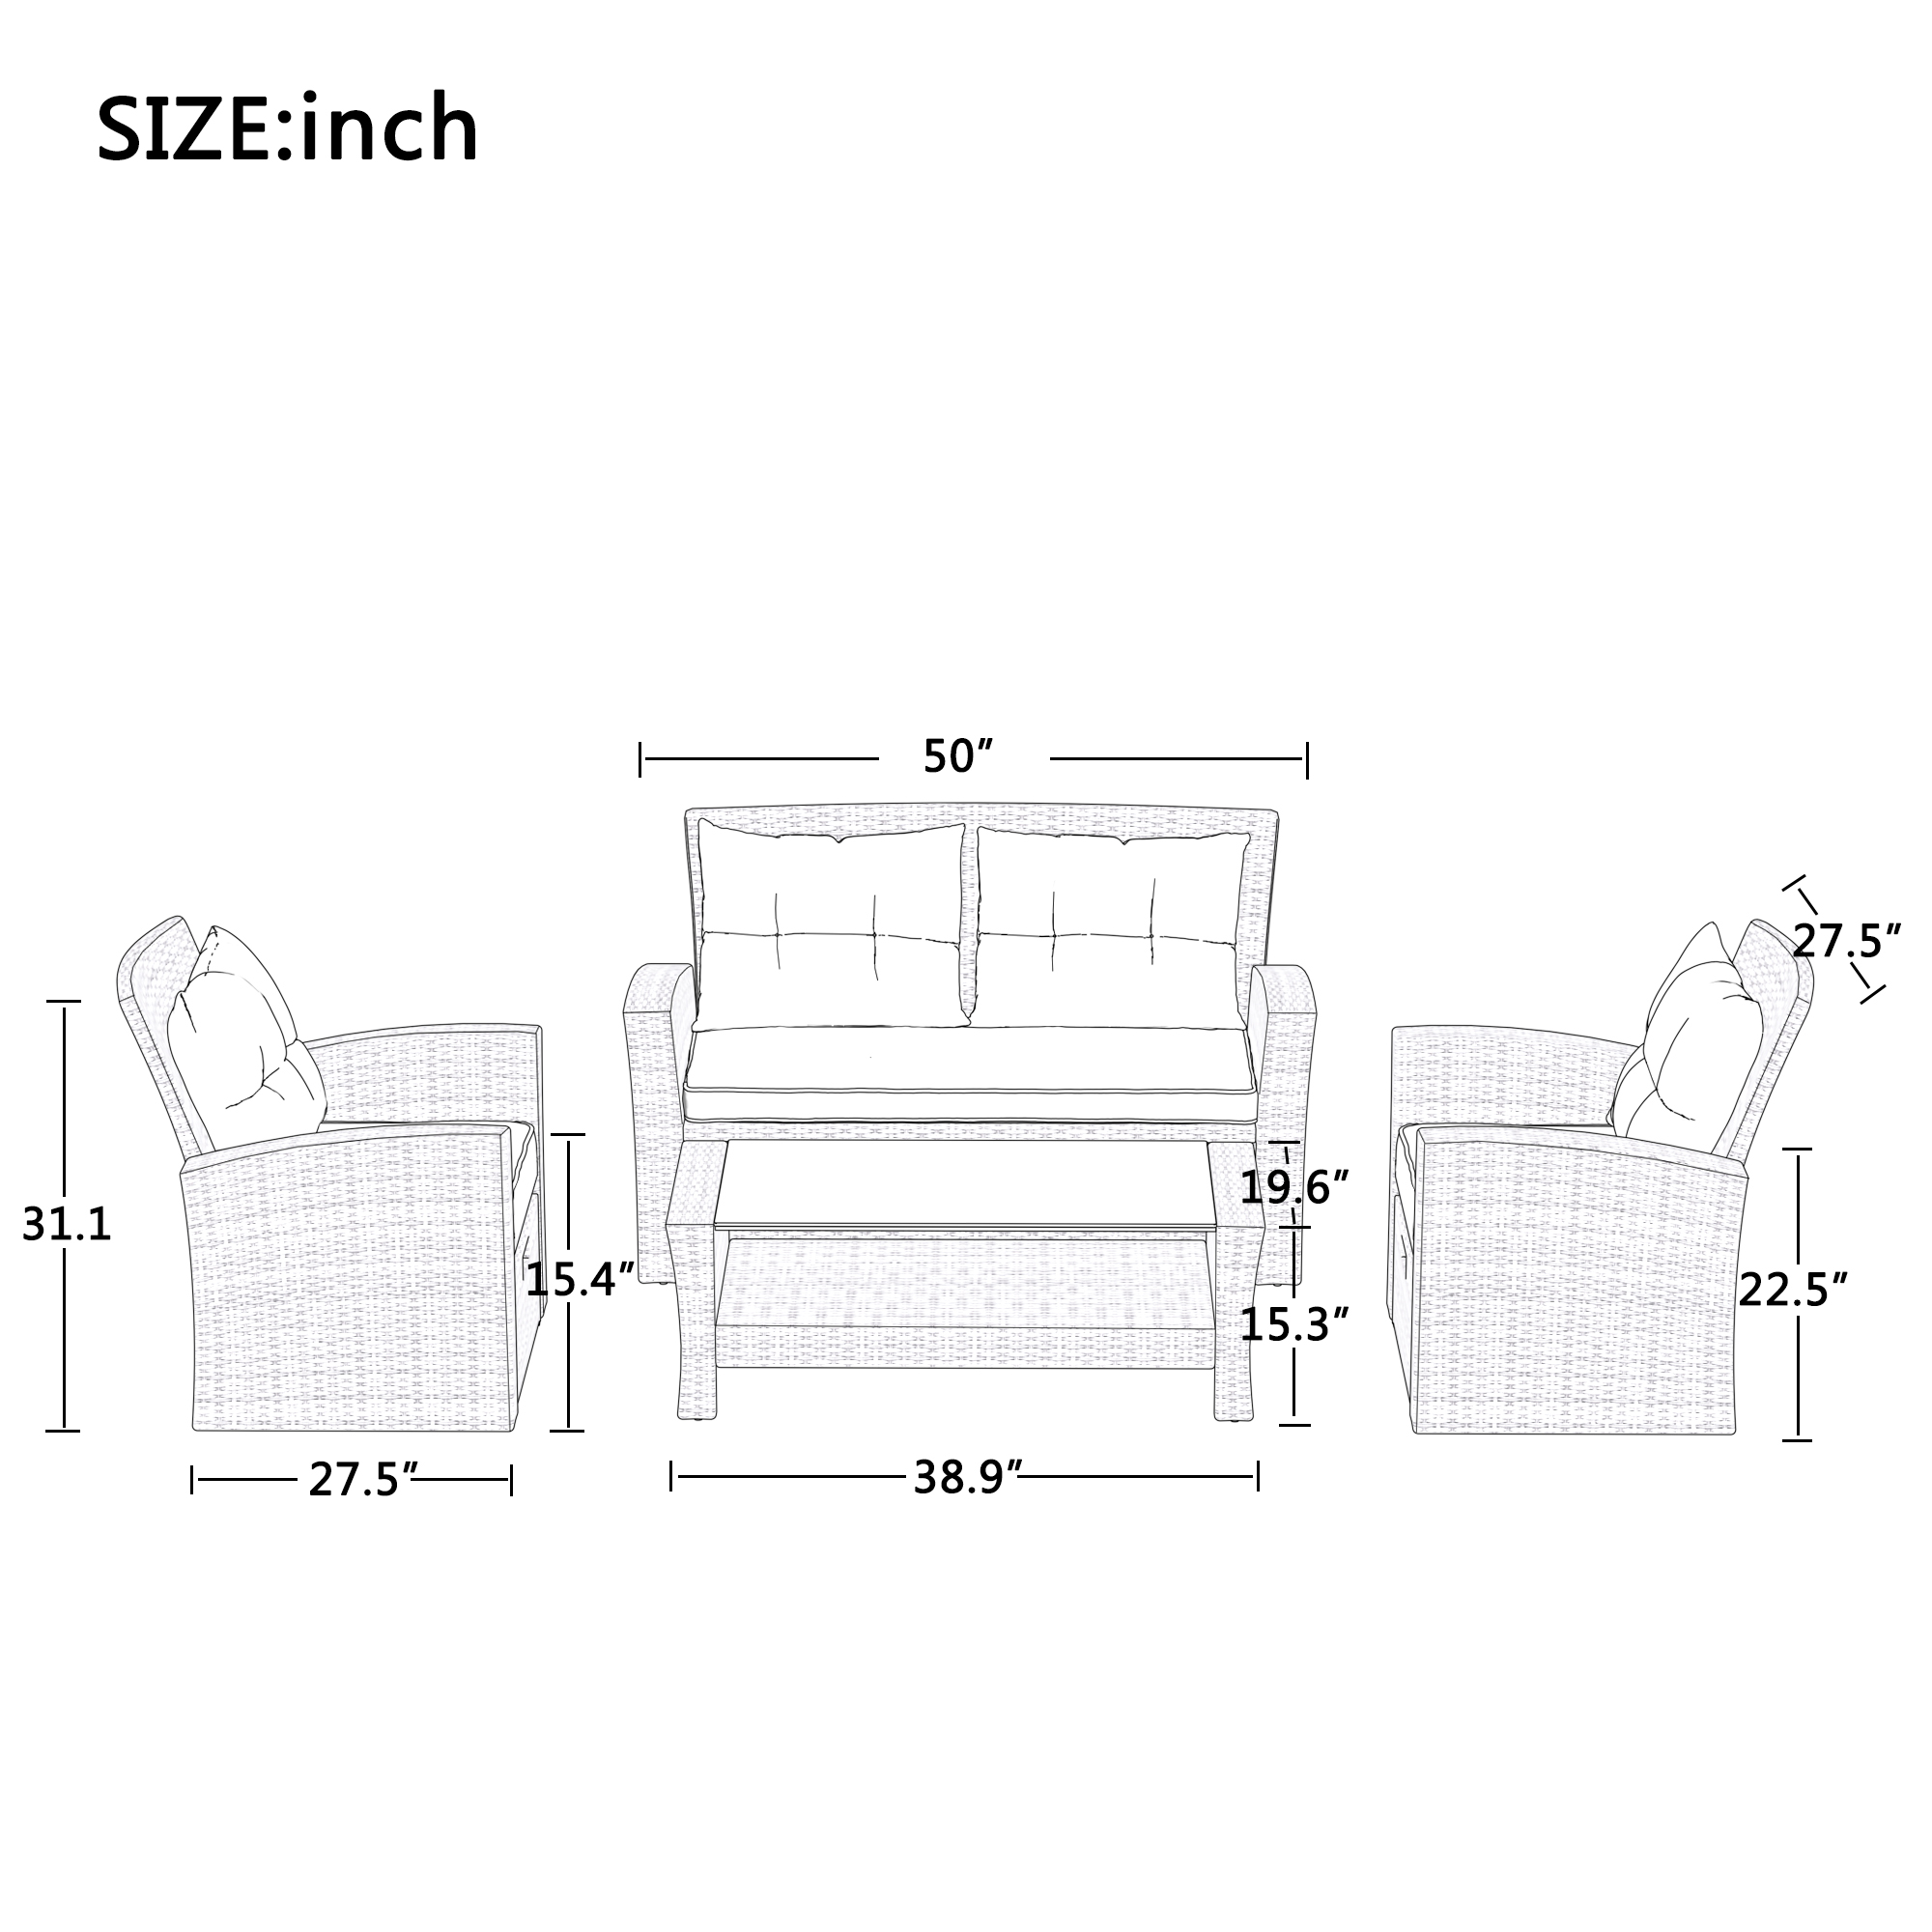 SESSLIFE 6-Piece Outdoor Sectional Sofa Set, Gray Wicker Patio Seating Sets with 19.6" High Tea Table and Soft Cushions, All-Weather Backyard Porch Garden Conversation Set - image 3 of 9